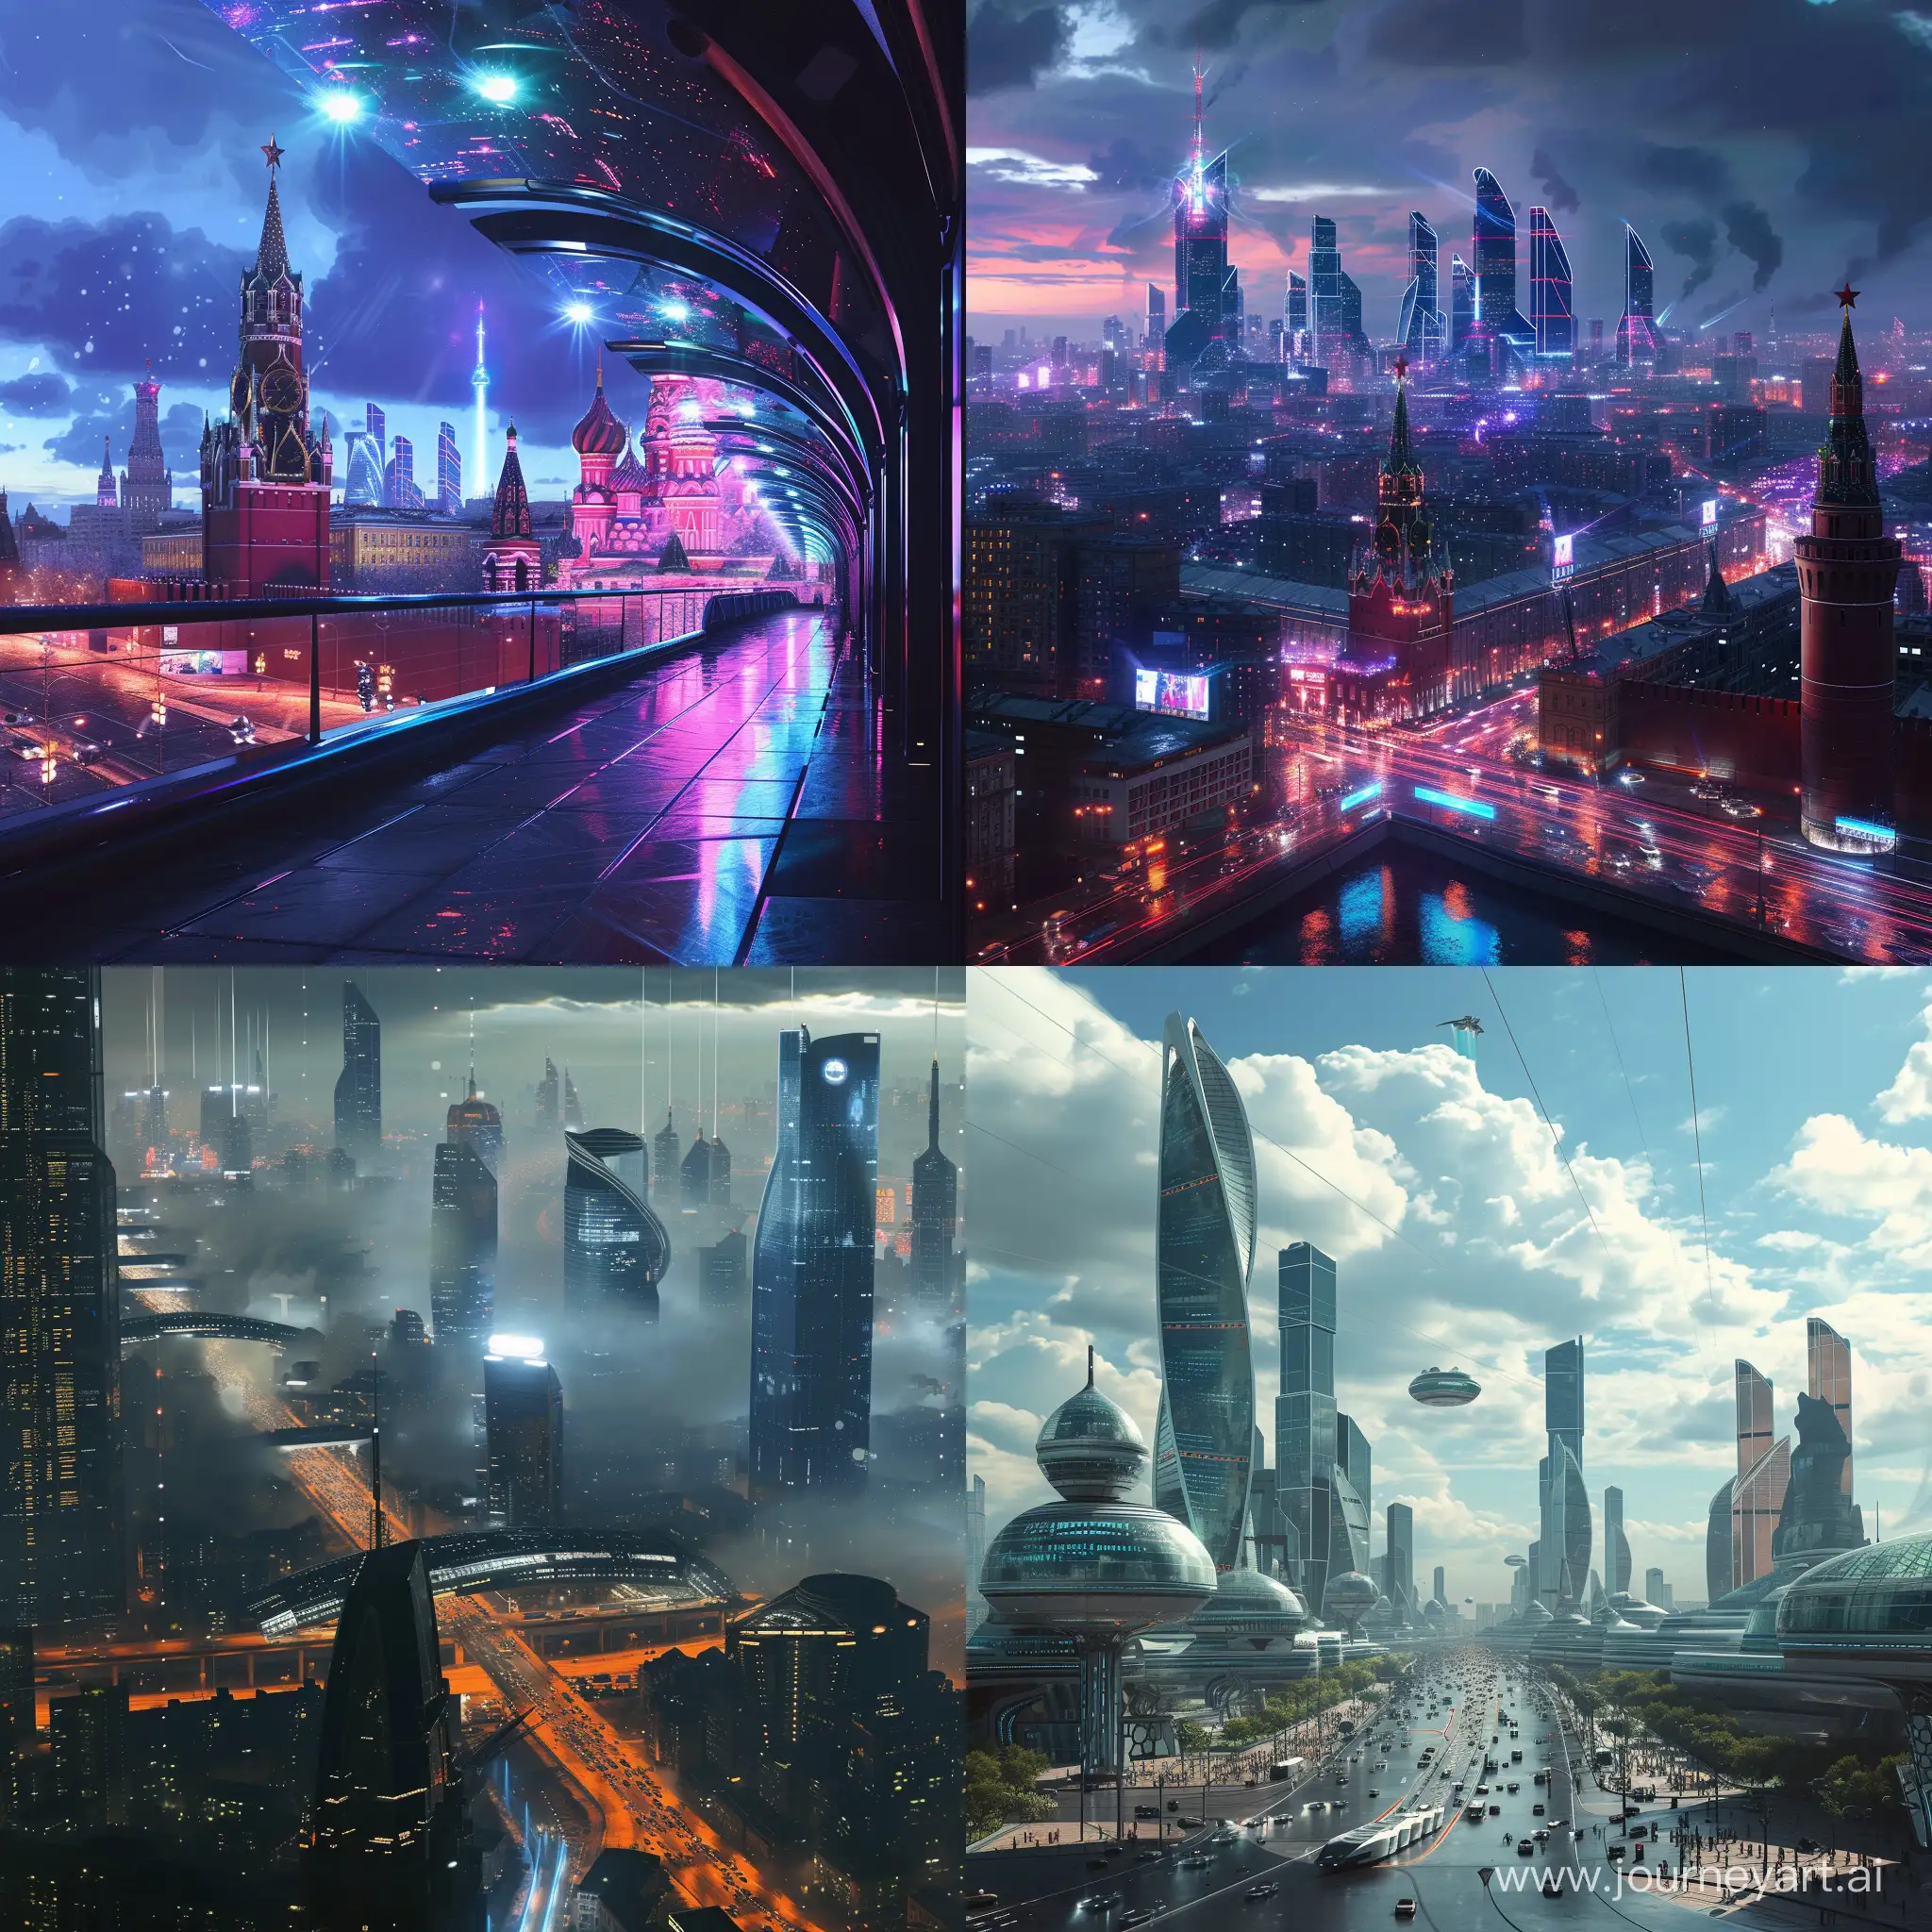 Futuristic-Moscow-Digital-Technologies-in-Cinematic-Style